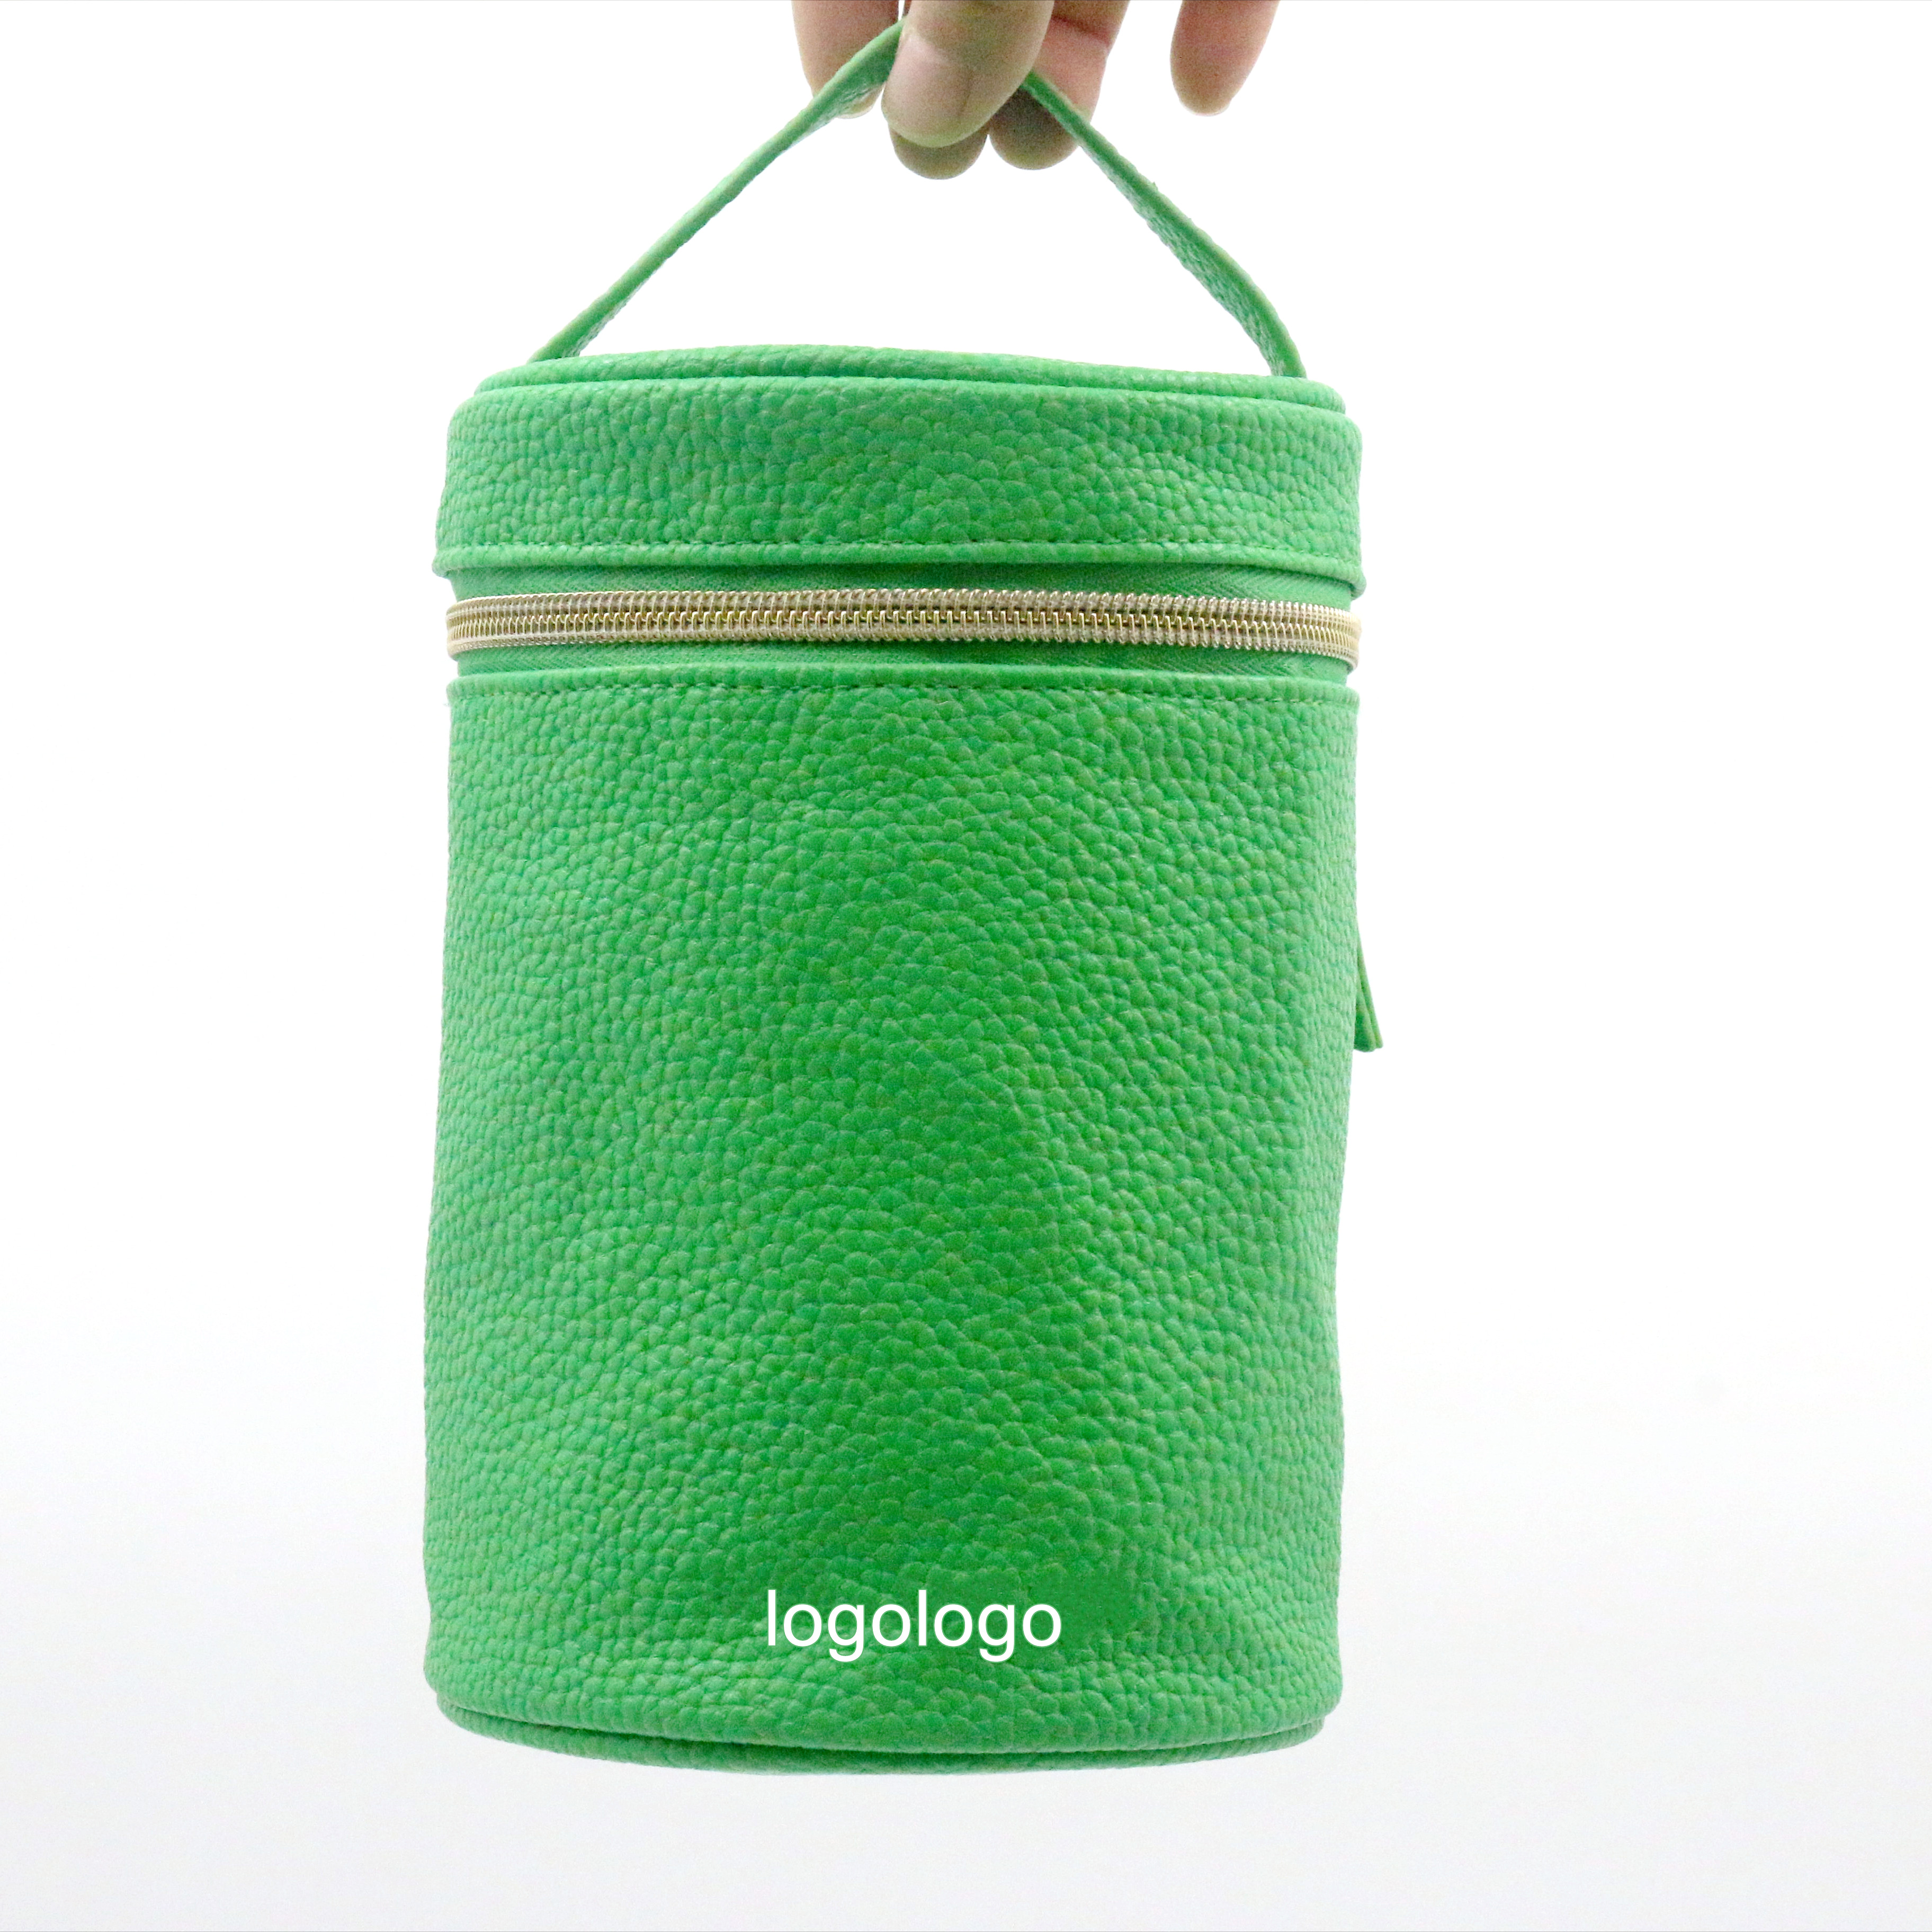 Eye-catching New Product Unique Design Water-based PU Beauty Bag Light Green Laichee Pattern Cylindric Shape Unisex Cosmetic Bag